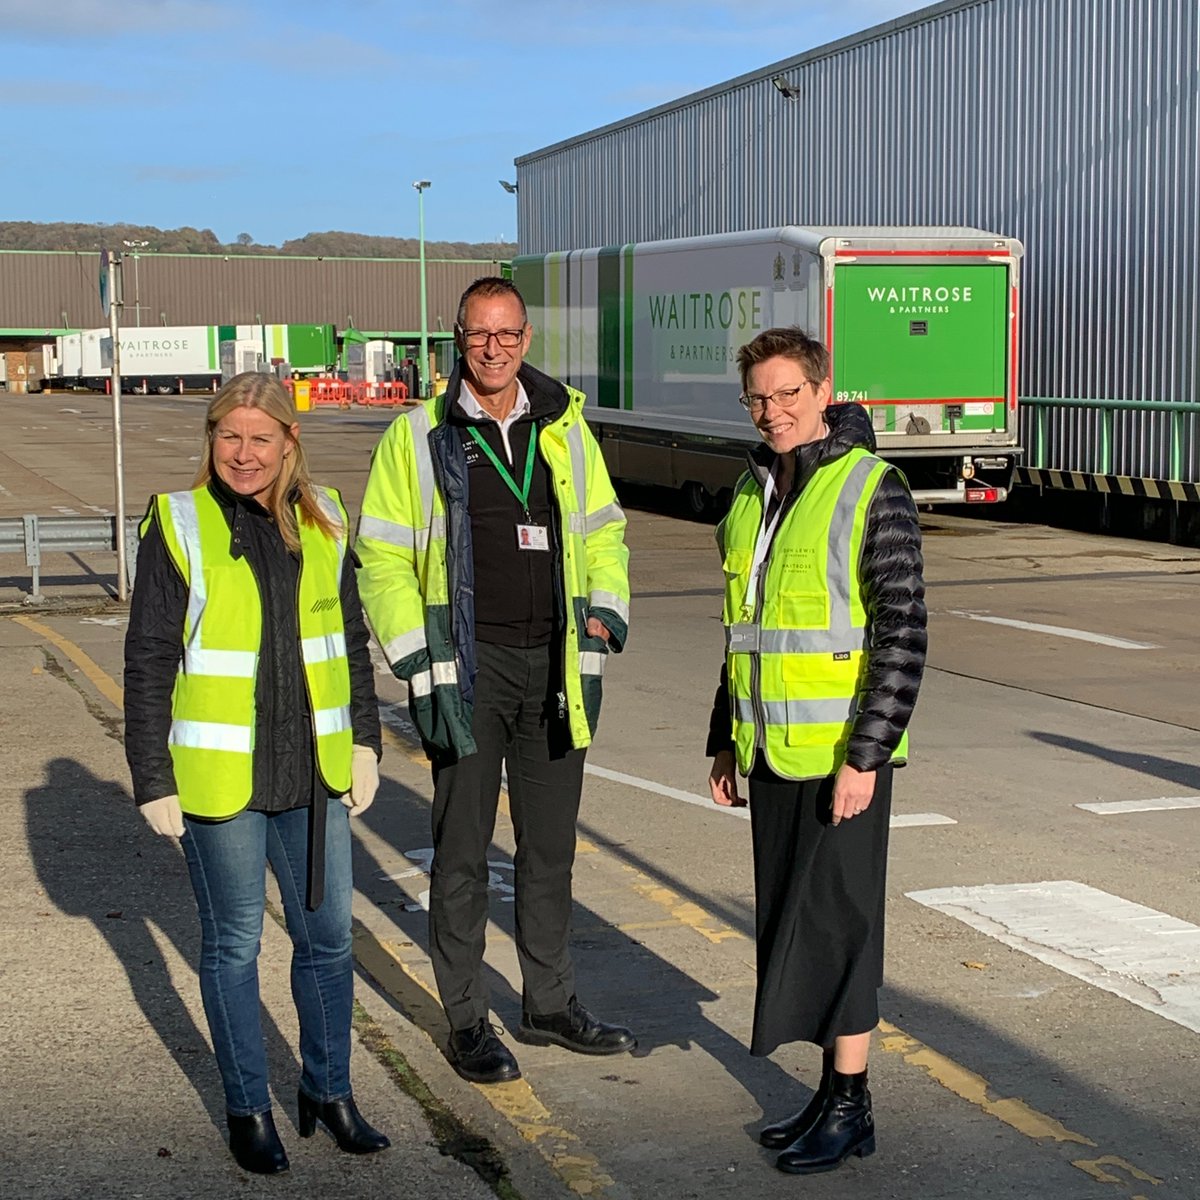 Delighted to welcome @tracey_crouch to @waitrose distribution centre in Aylesford. We shared details of our investment in biomethane in partnership with @CNG_FUELS to help reach net zero, the skills and employment opportunities we offer, and our support for the local community🚛